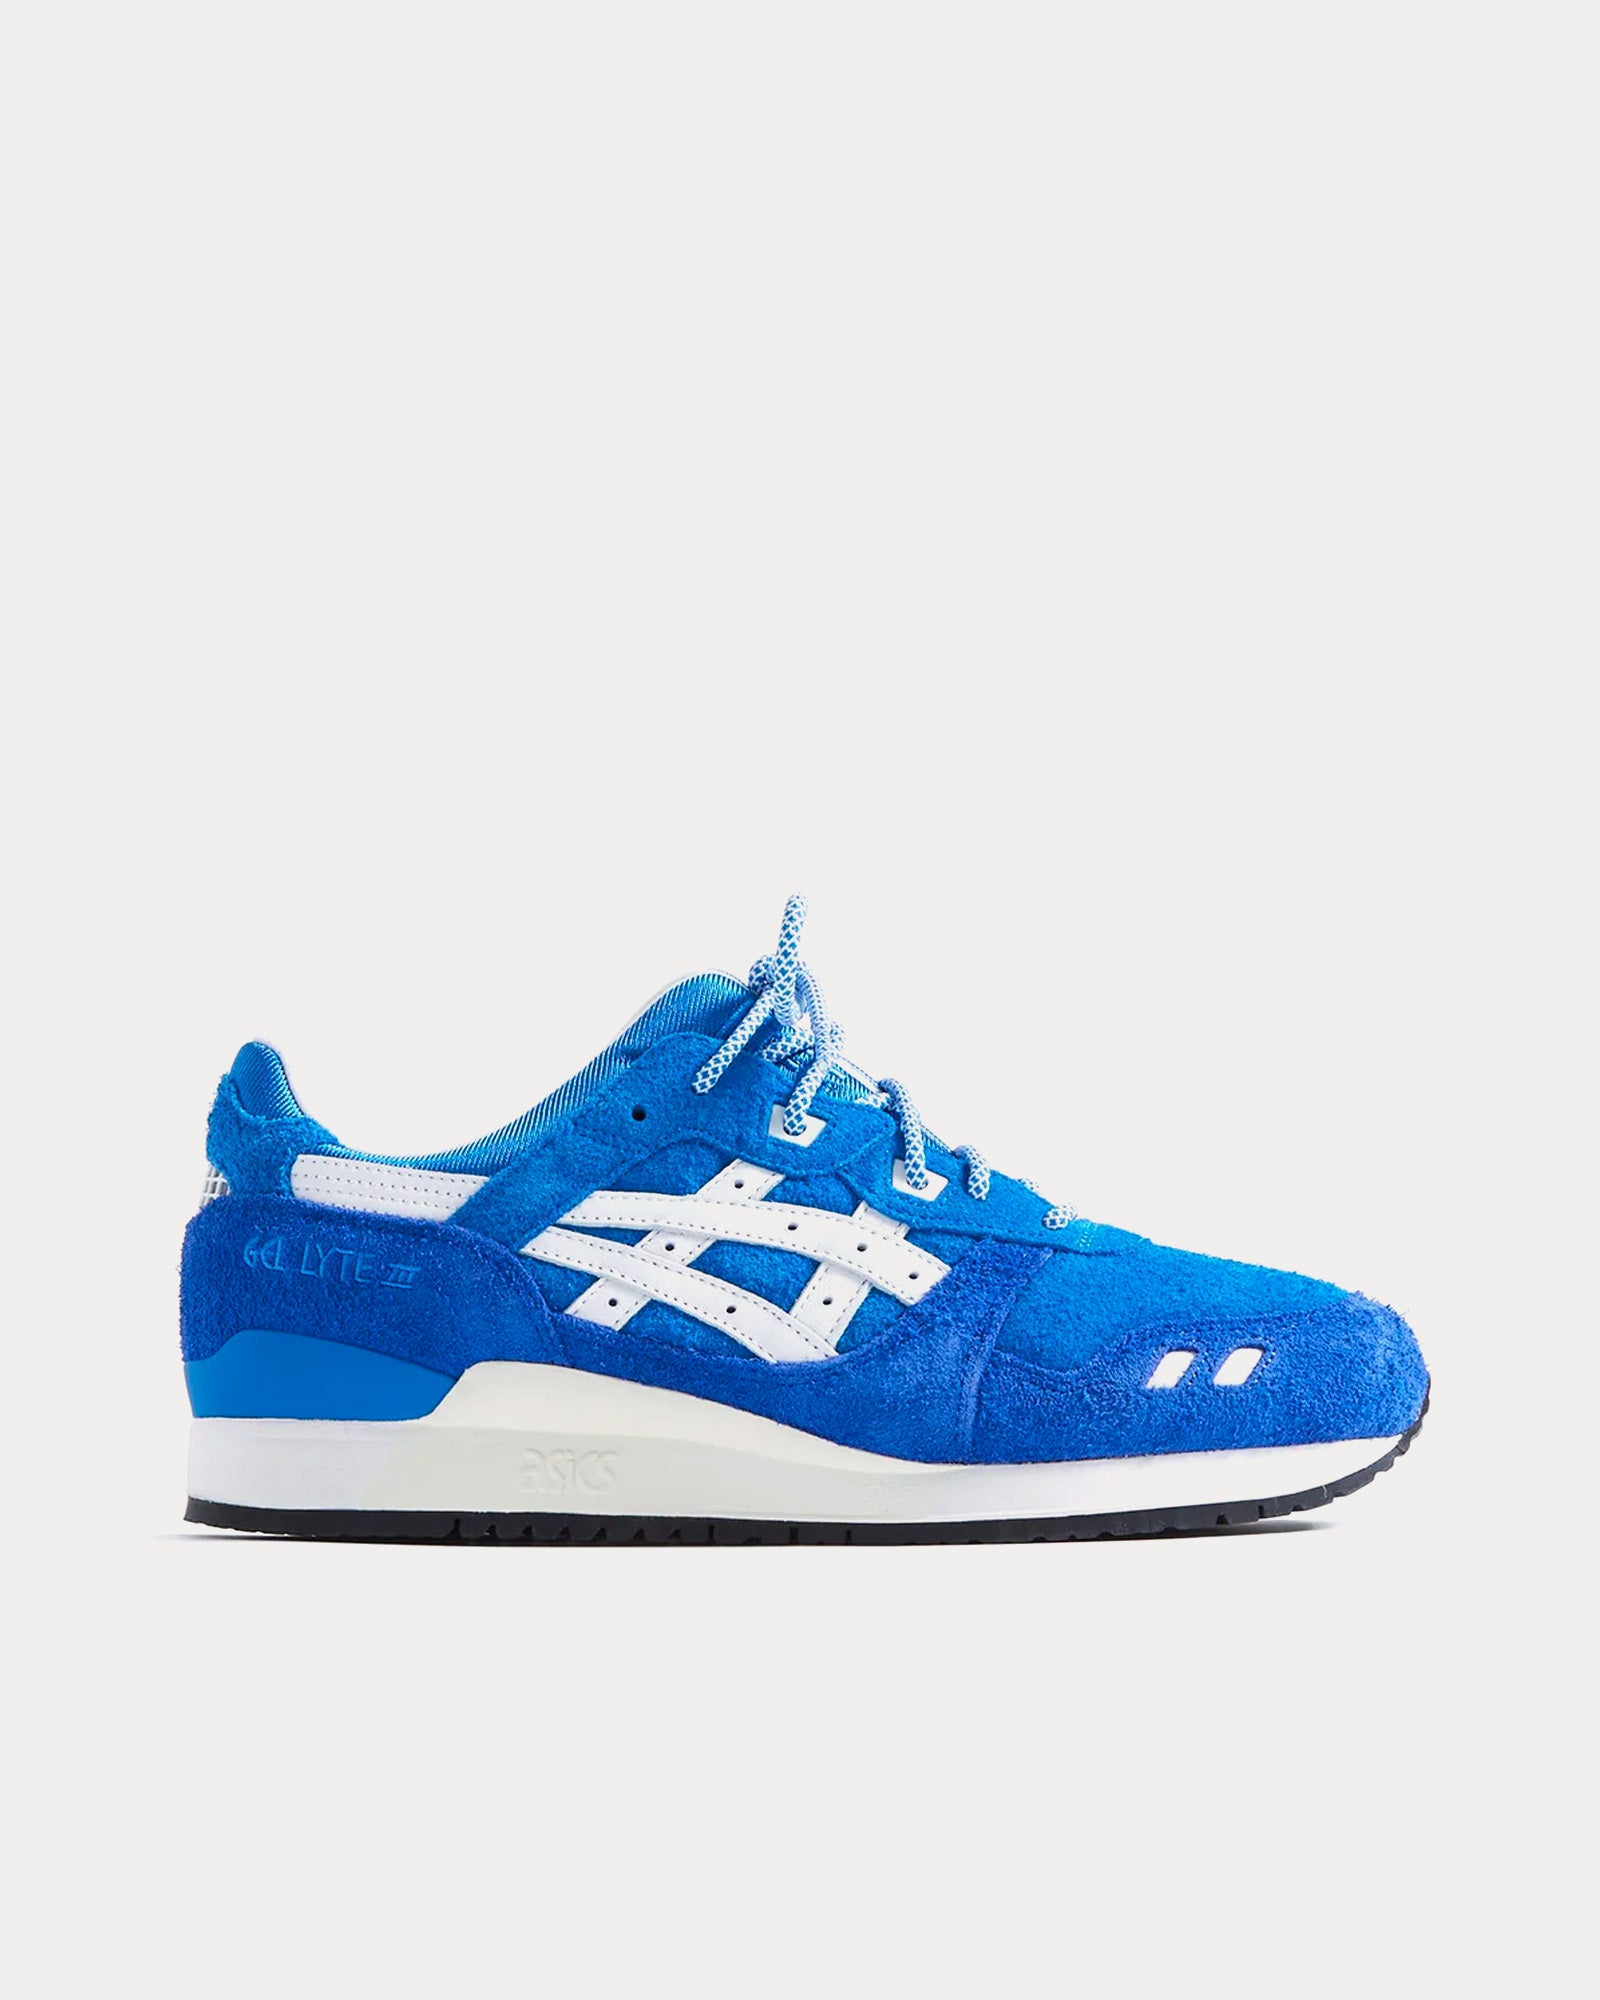 Asics x Kith - Marvel Gel-Lyte III Remastered 'Beast' Blue / White Low Top Sneakers